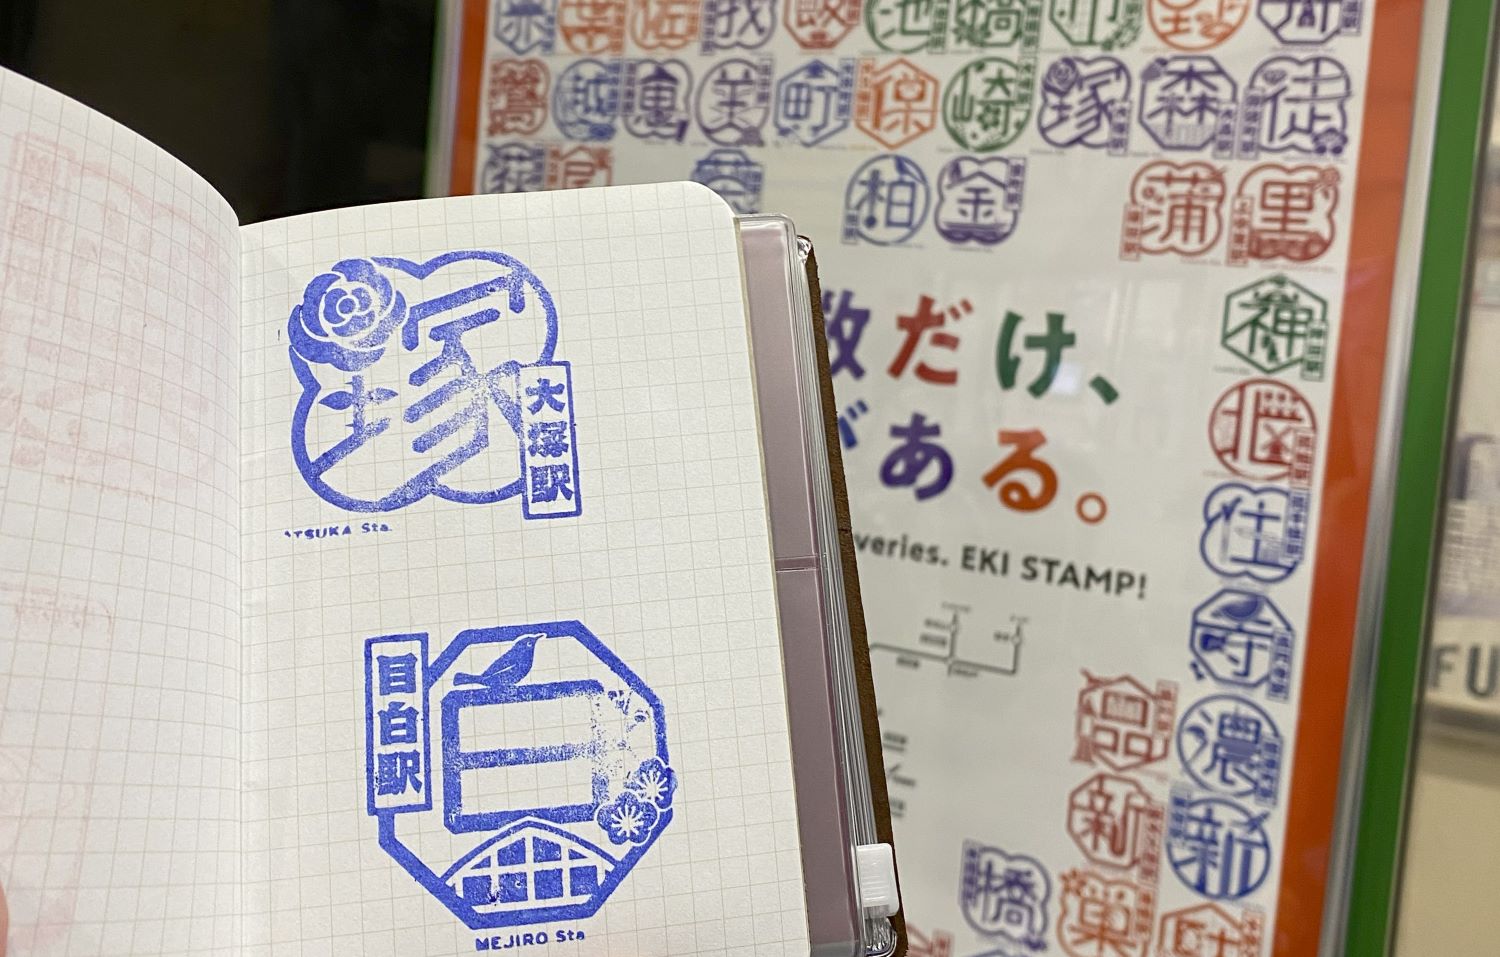 How to find eki stamps in Japan